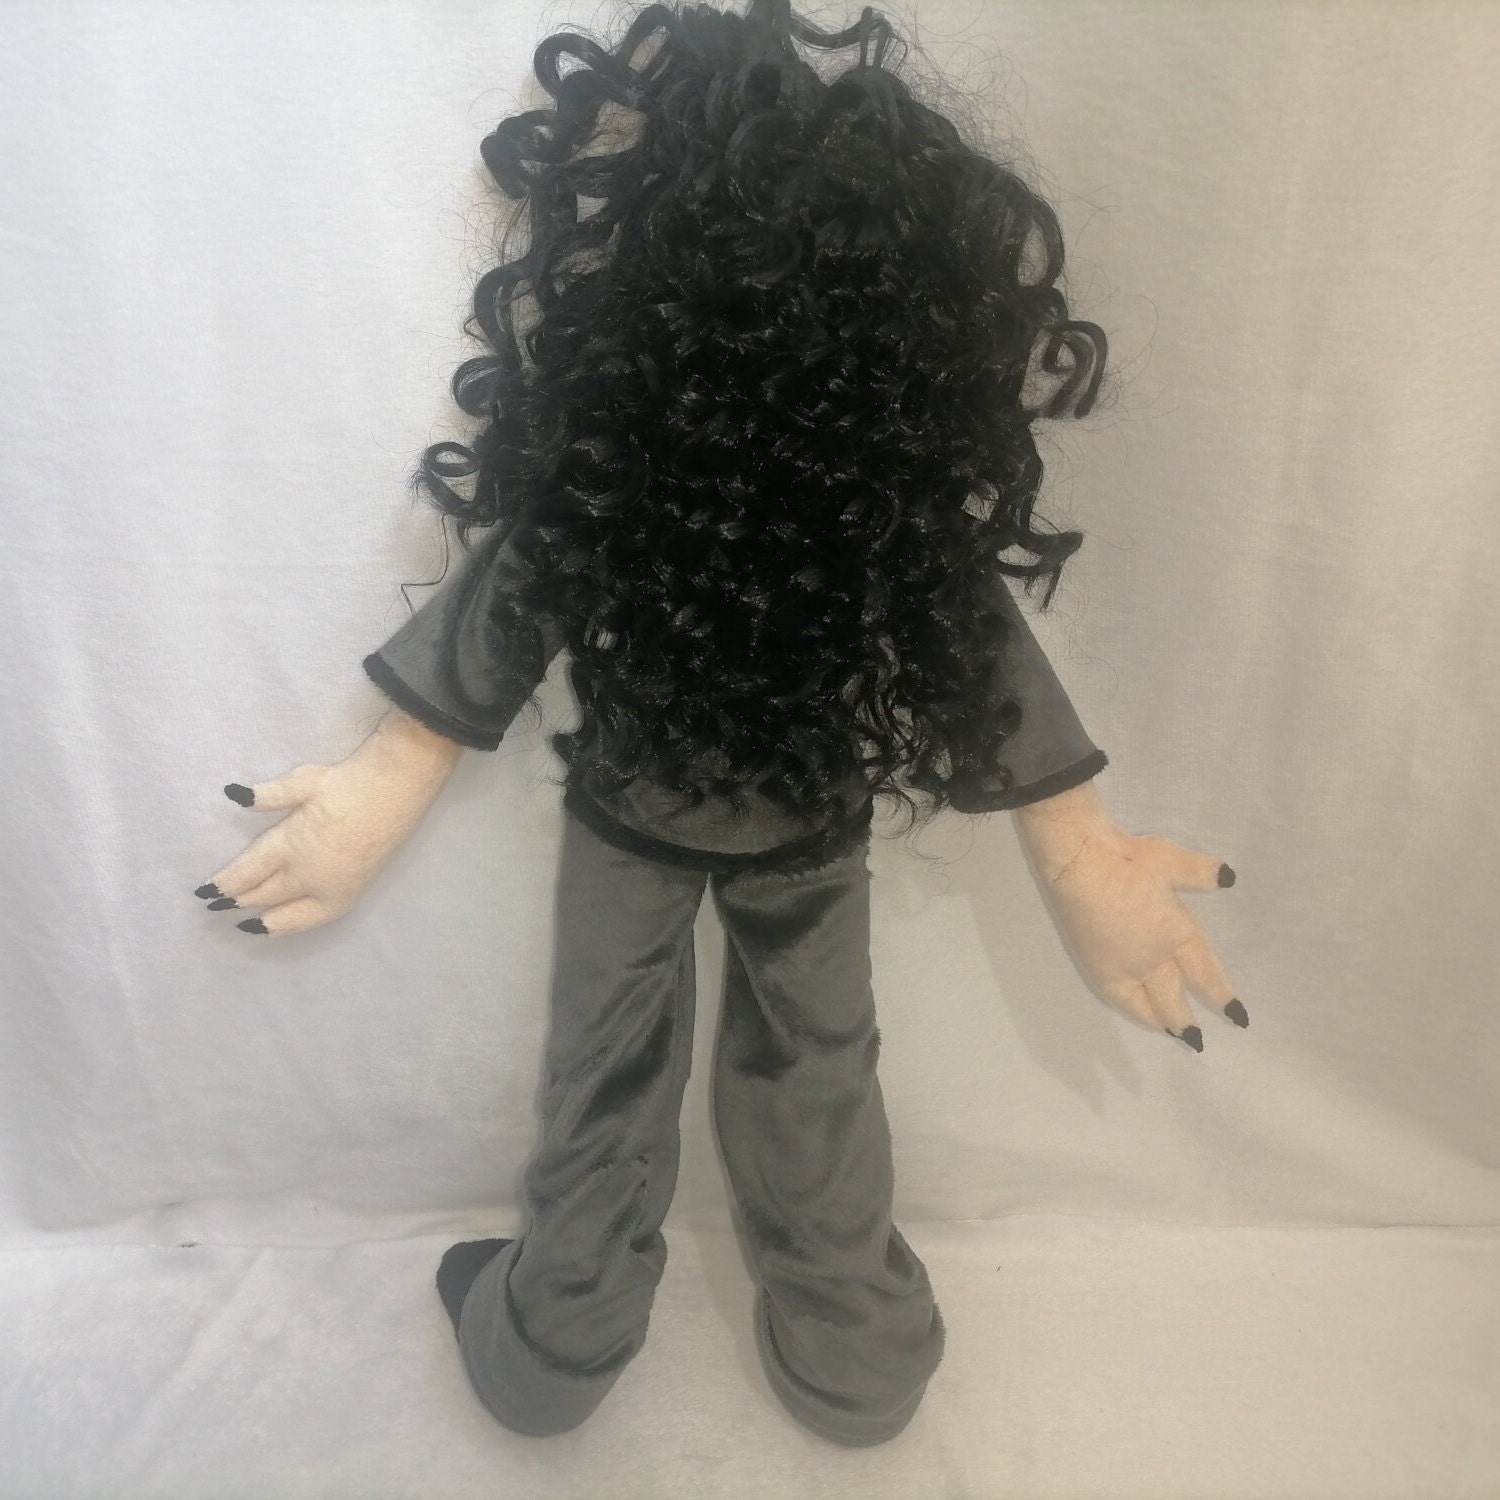 John Doe 157 40 Cm Plush Toy A Fan Toy From a Big Fan of This Indie Horror  